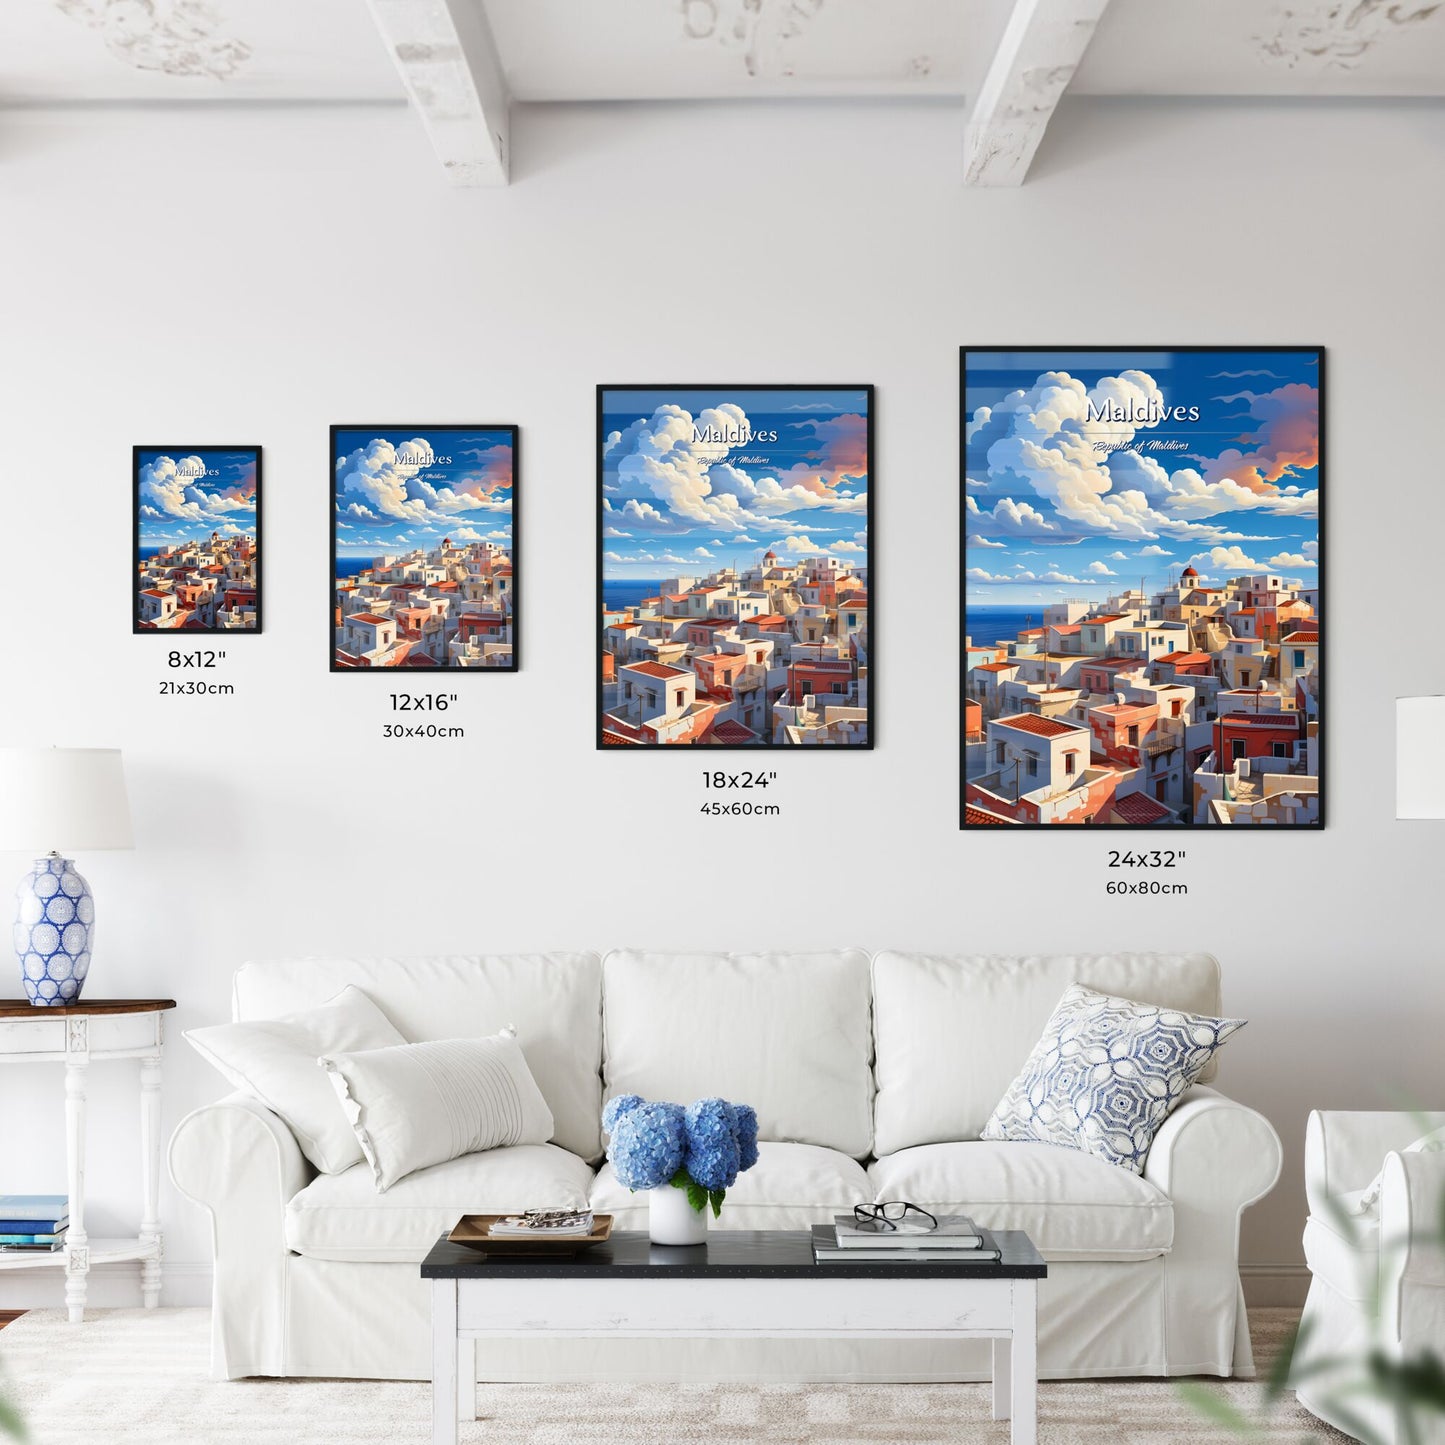 On the roofs of Maldives, Republic of Maldives - Art print of a group of buildings with red roofs and blue sky with clouds Default Title